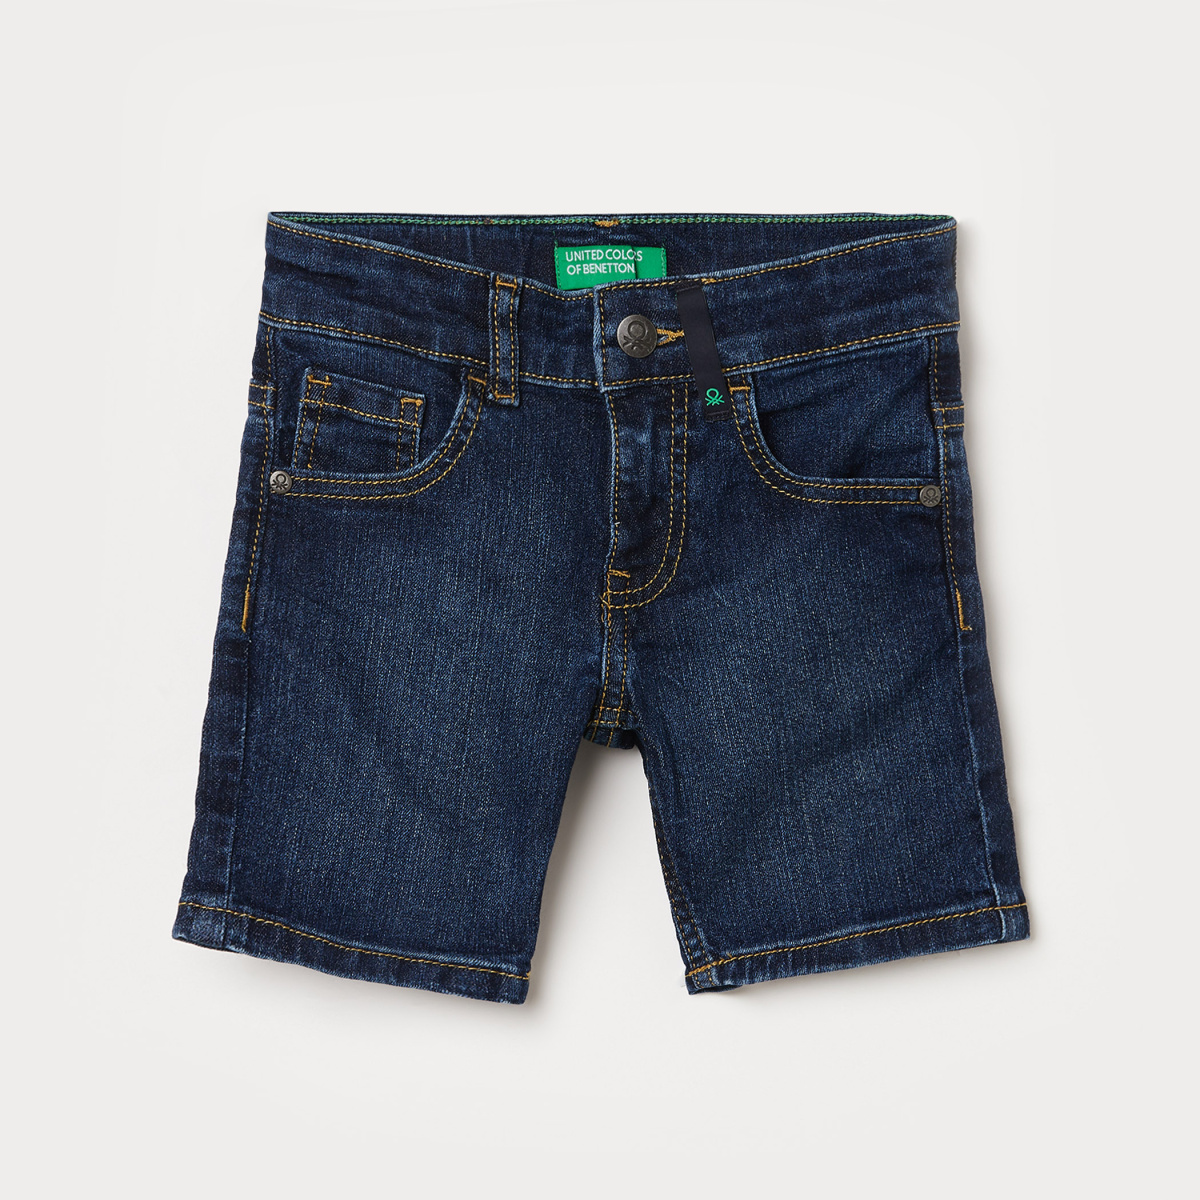 UNITED COLORS OF BENETTON Boys Solid Woven Denim Shorts